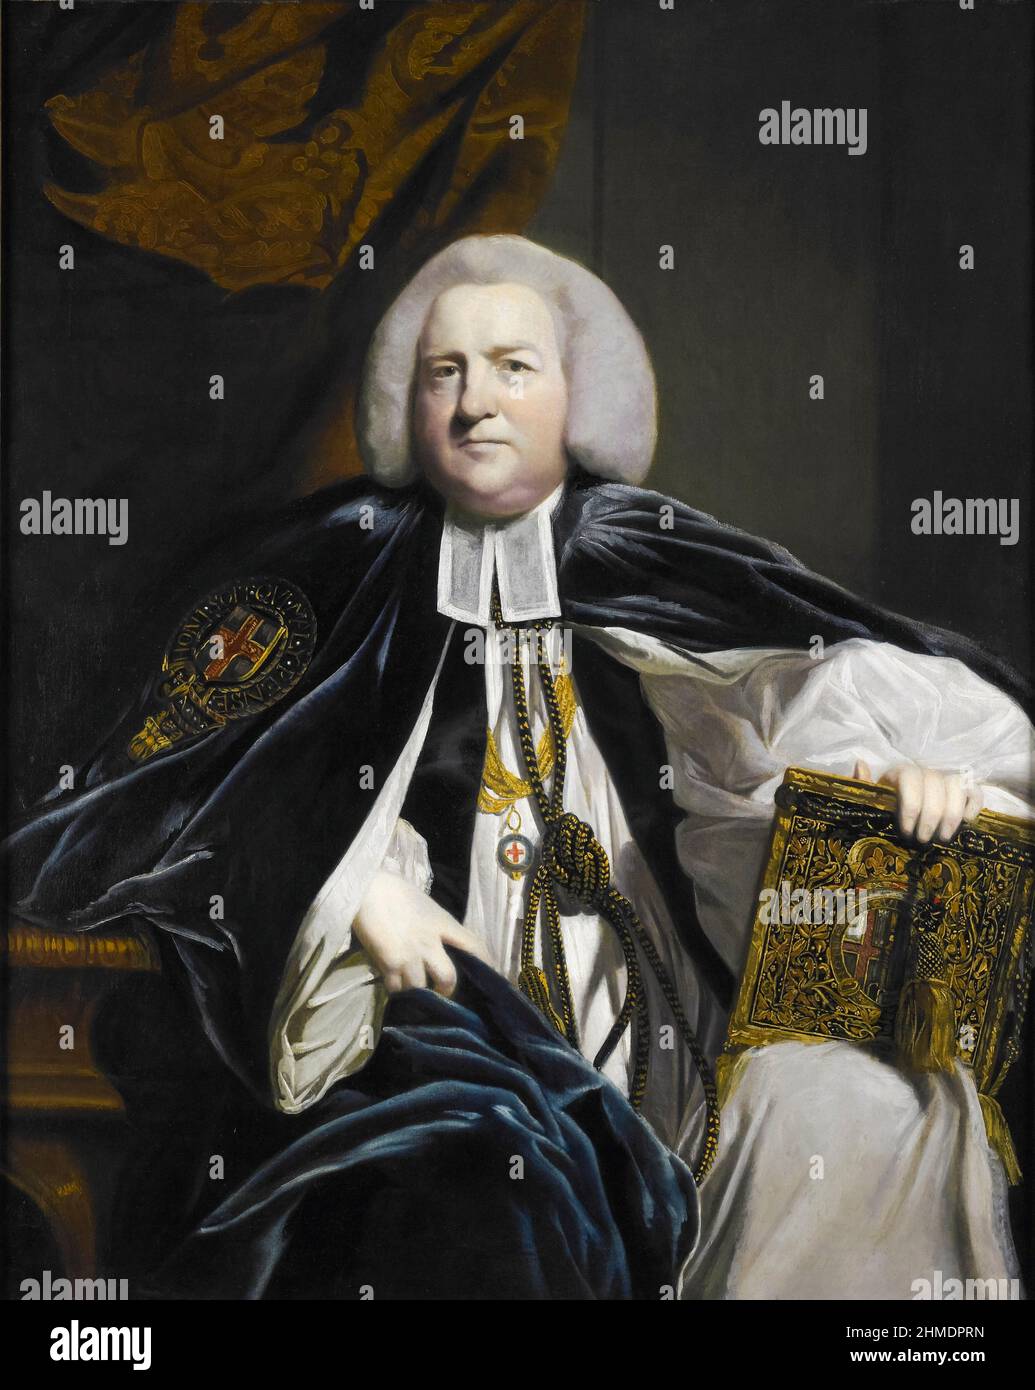 Robert Hay-Drummond (1711-1776), Archbishop of York and Chancellor of the Order of the Garter, portrait painting by Sir Joshua Reynolds, 1764 Stock Photo